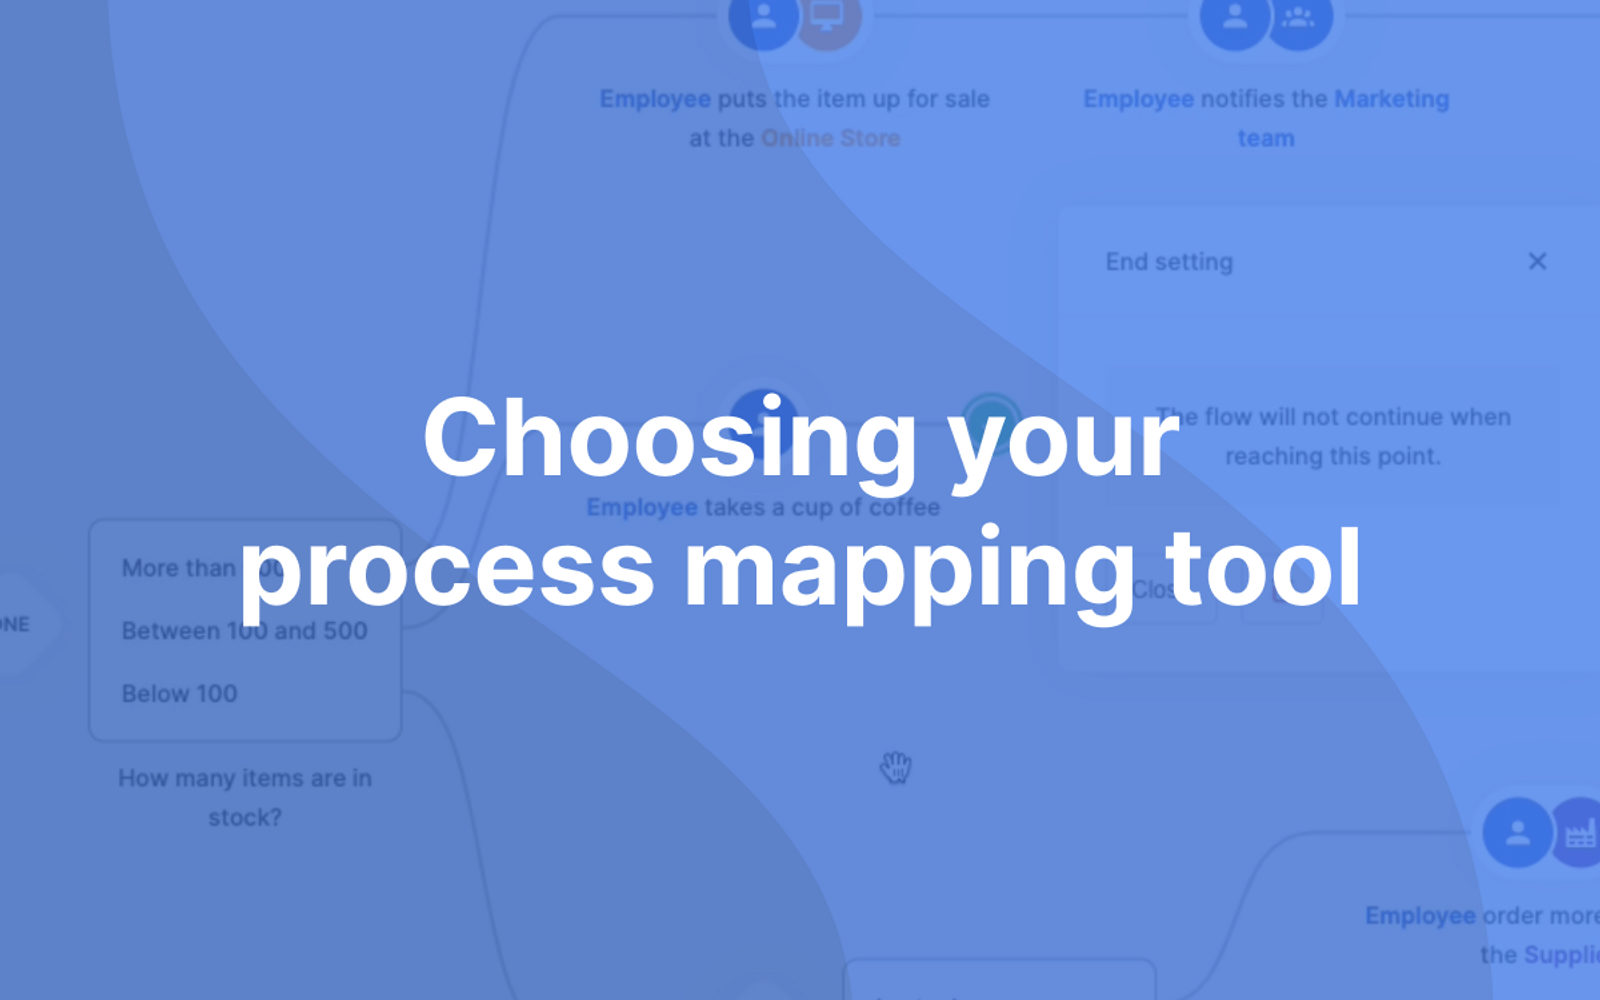 "Choosing your process mapping tool" written on a blue overlay with a screenshot of a ShiftX flow as the background